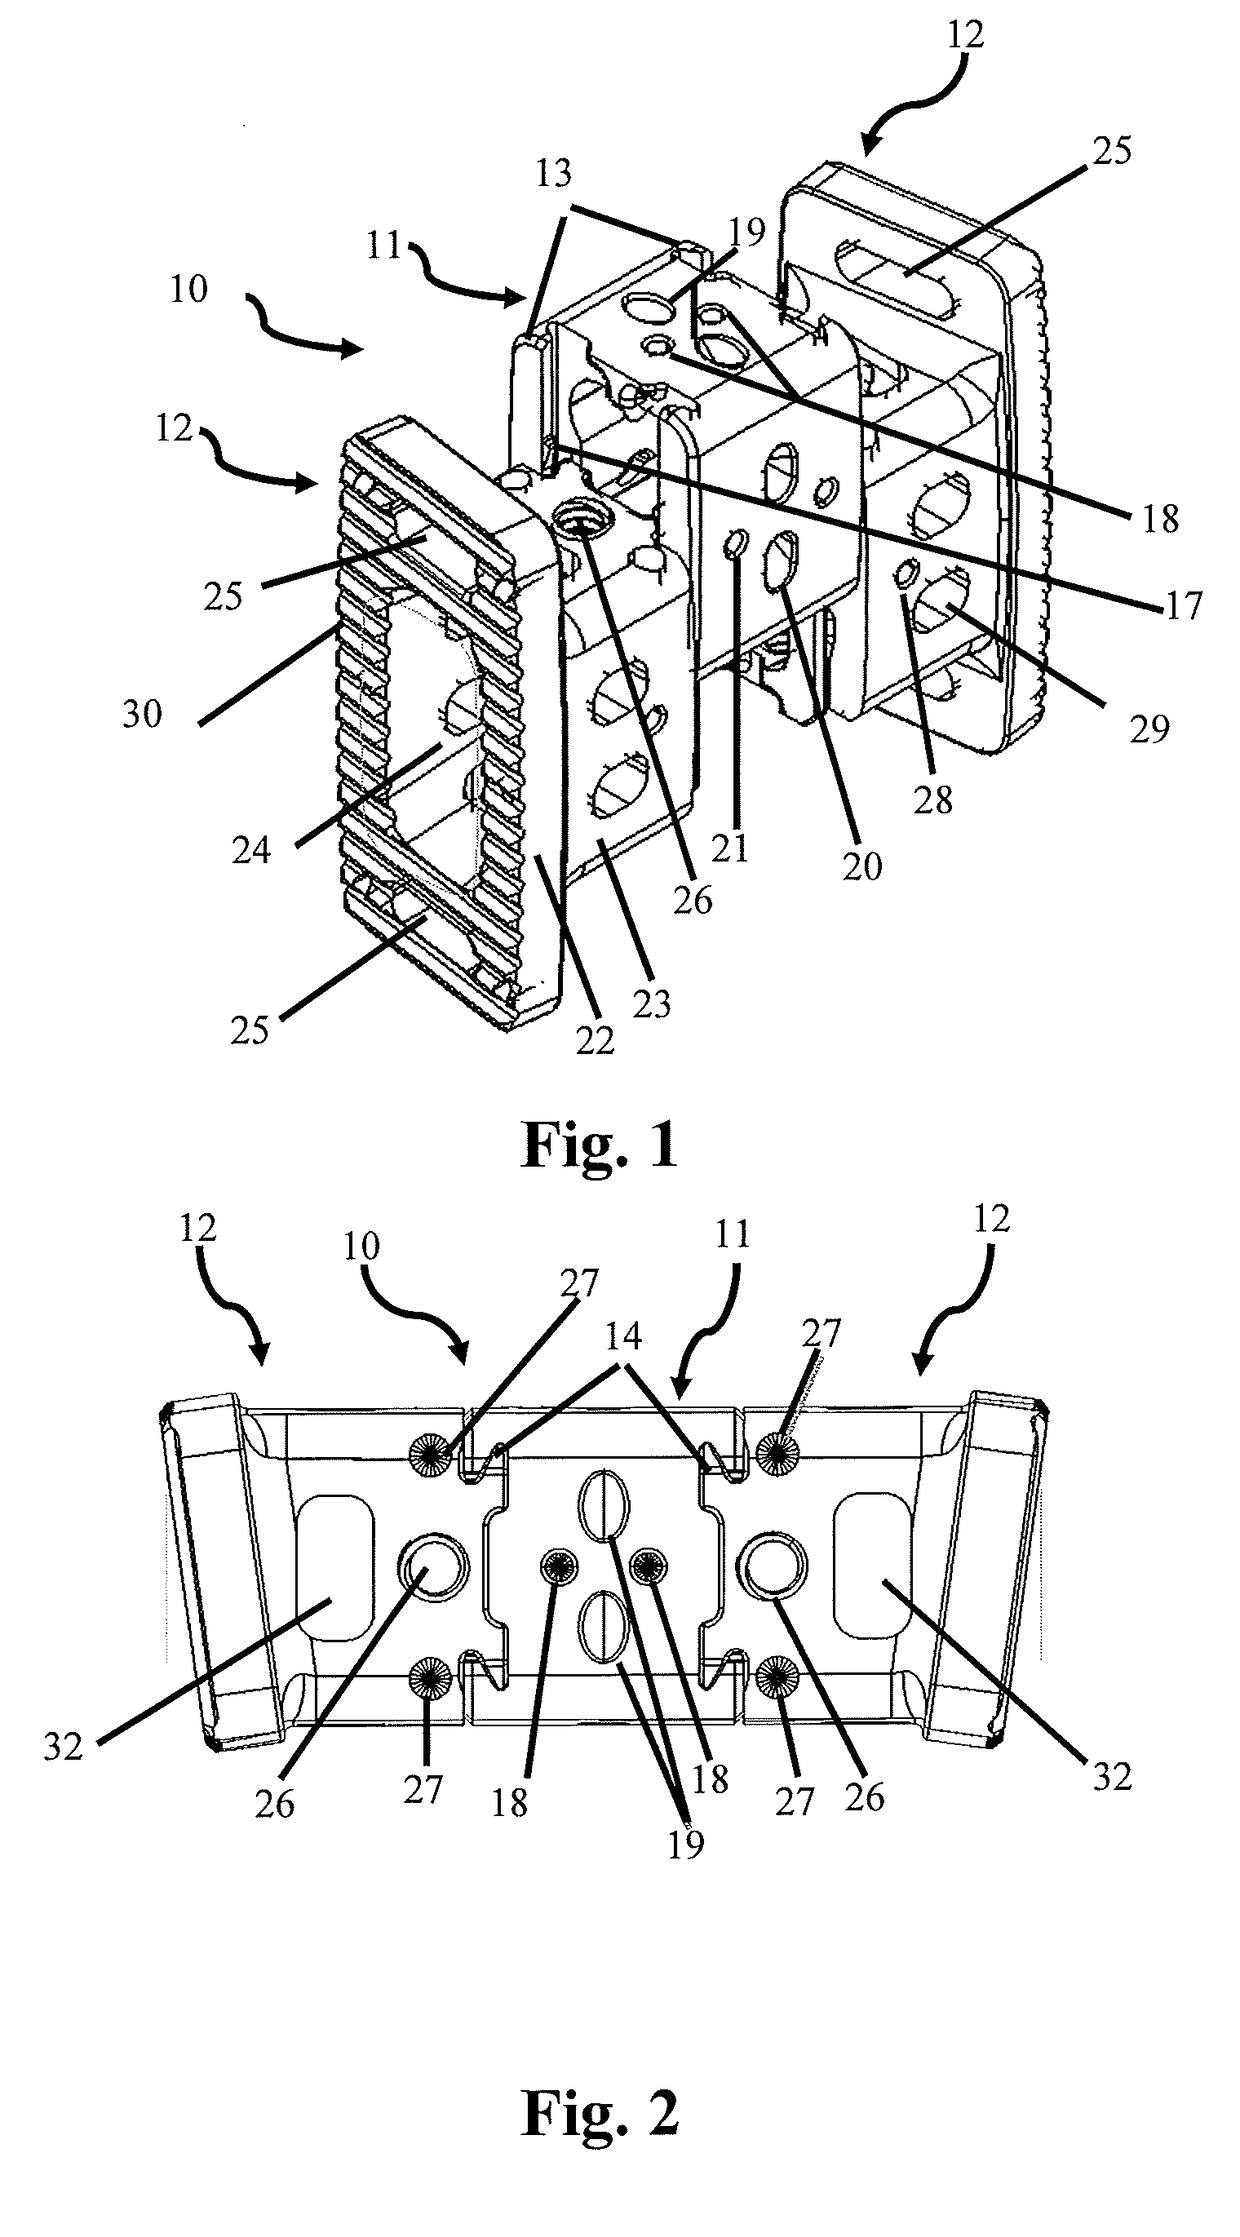 Vertebral Body Replacement and Insertion Methods